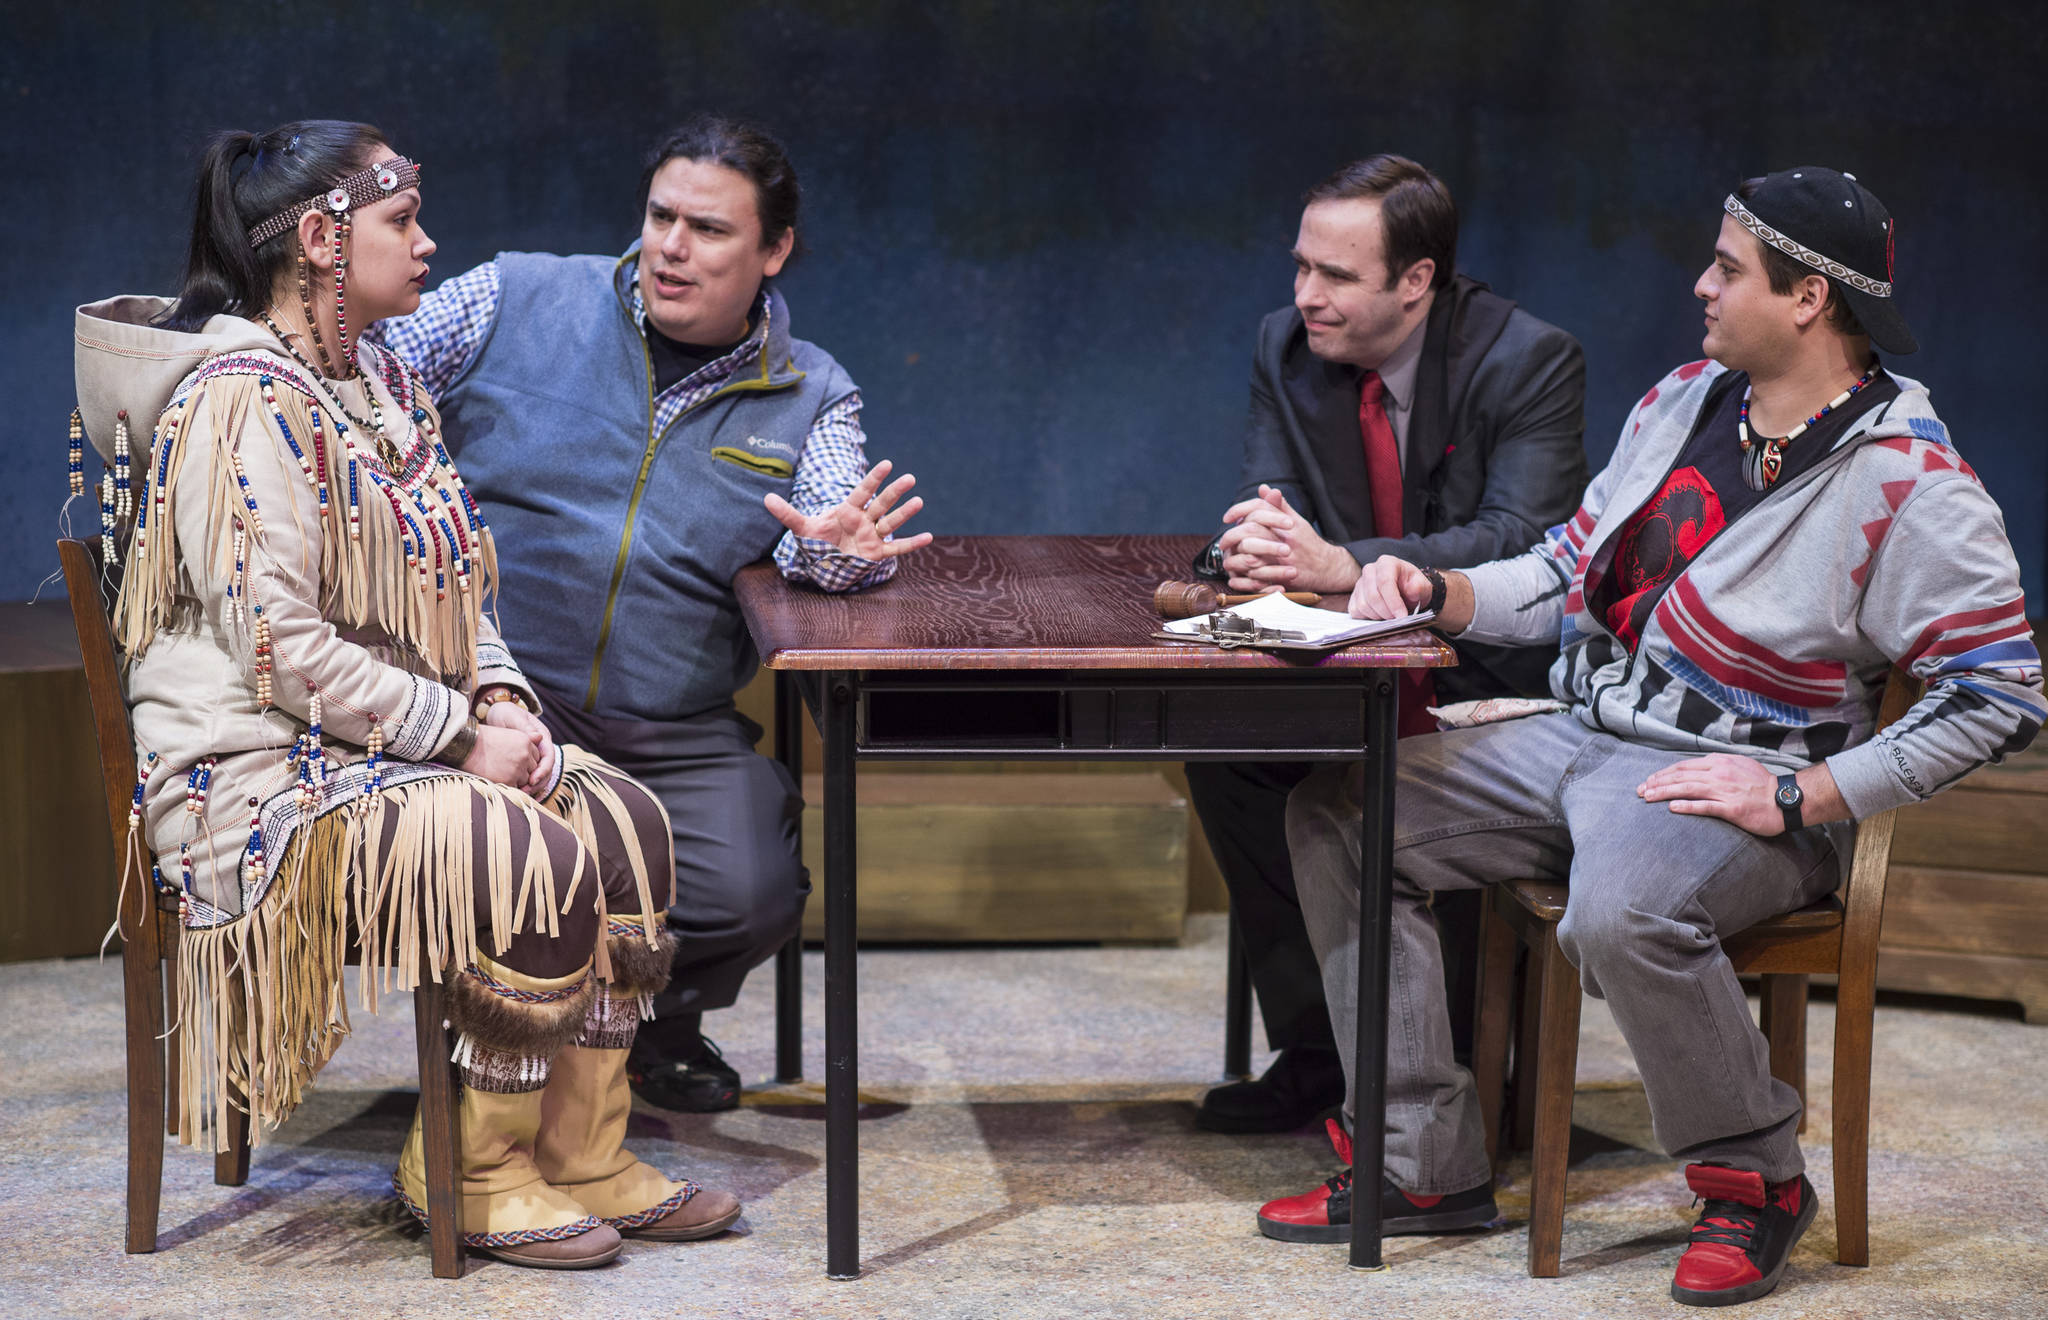 Erin Tripp, left, Frank Henry Katasse, James Sullivan and Alec Shamas rehearse in Perseverance Theatre’s production of William Inc. on Tuesday, Jan. 23, 2018. (Michael Penn | For the Capital City Weekly)